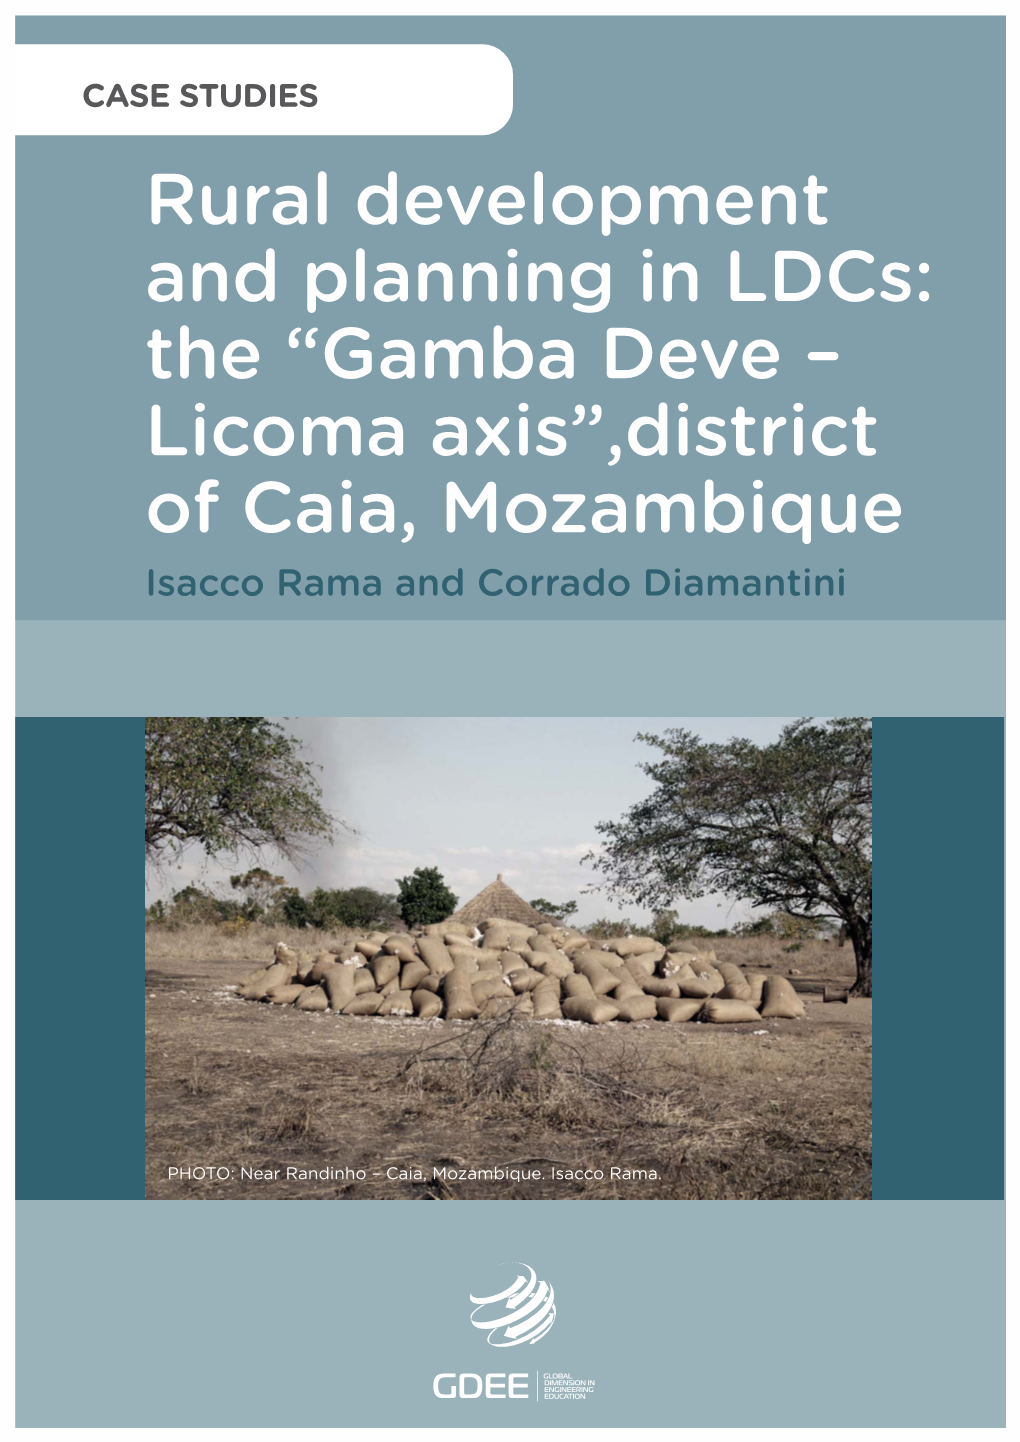 Rural Development and Planning in Ldcs: the “Gamba Deve – Licoma Axis”,District of Caia, Mozambique Isacco Rama and Corrado Diamantini